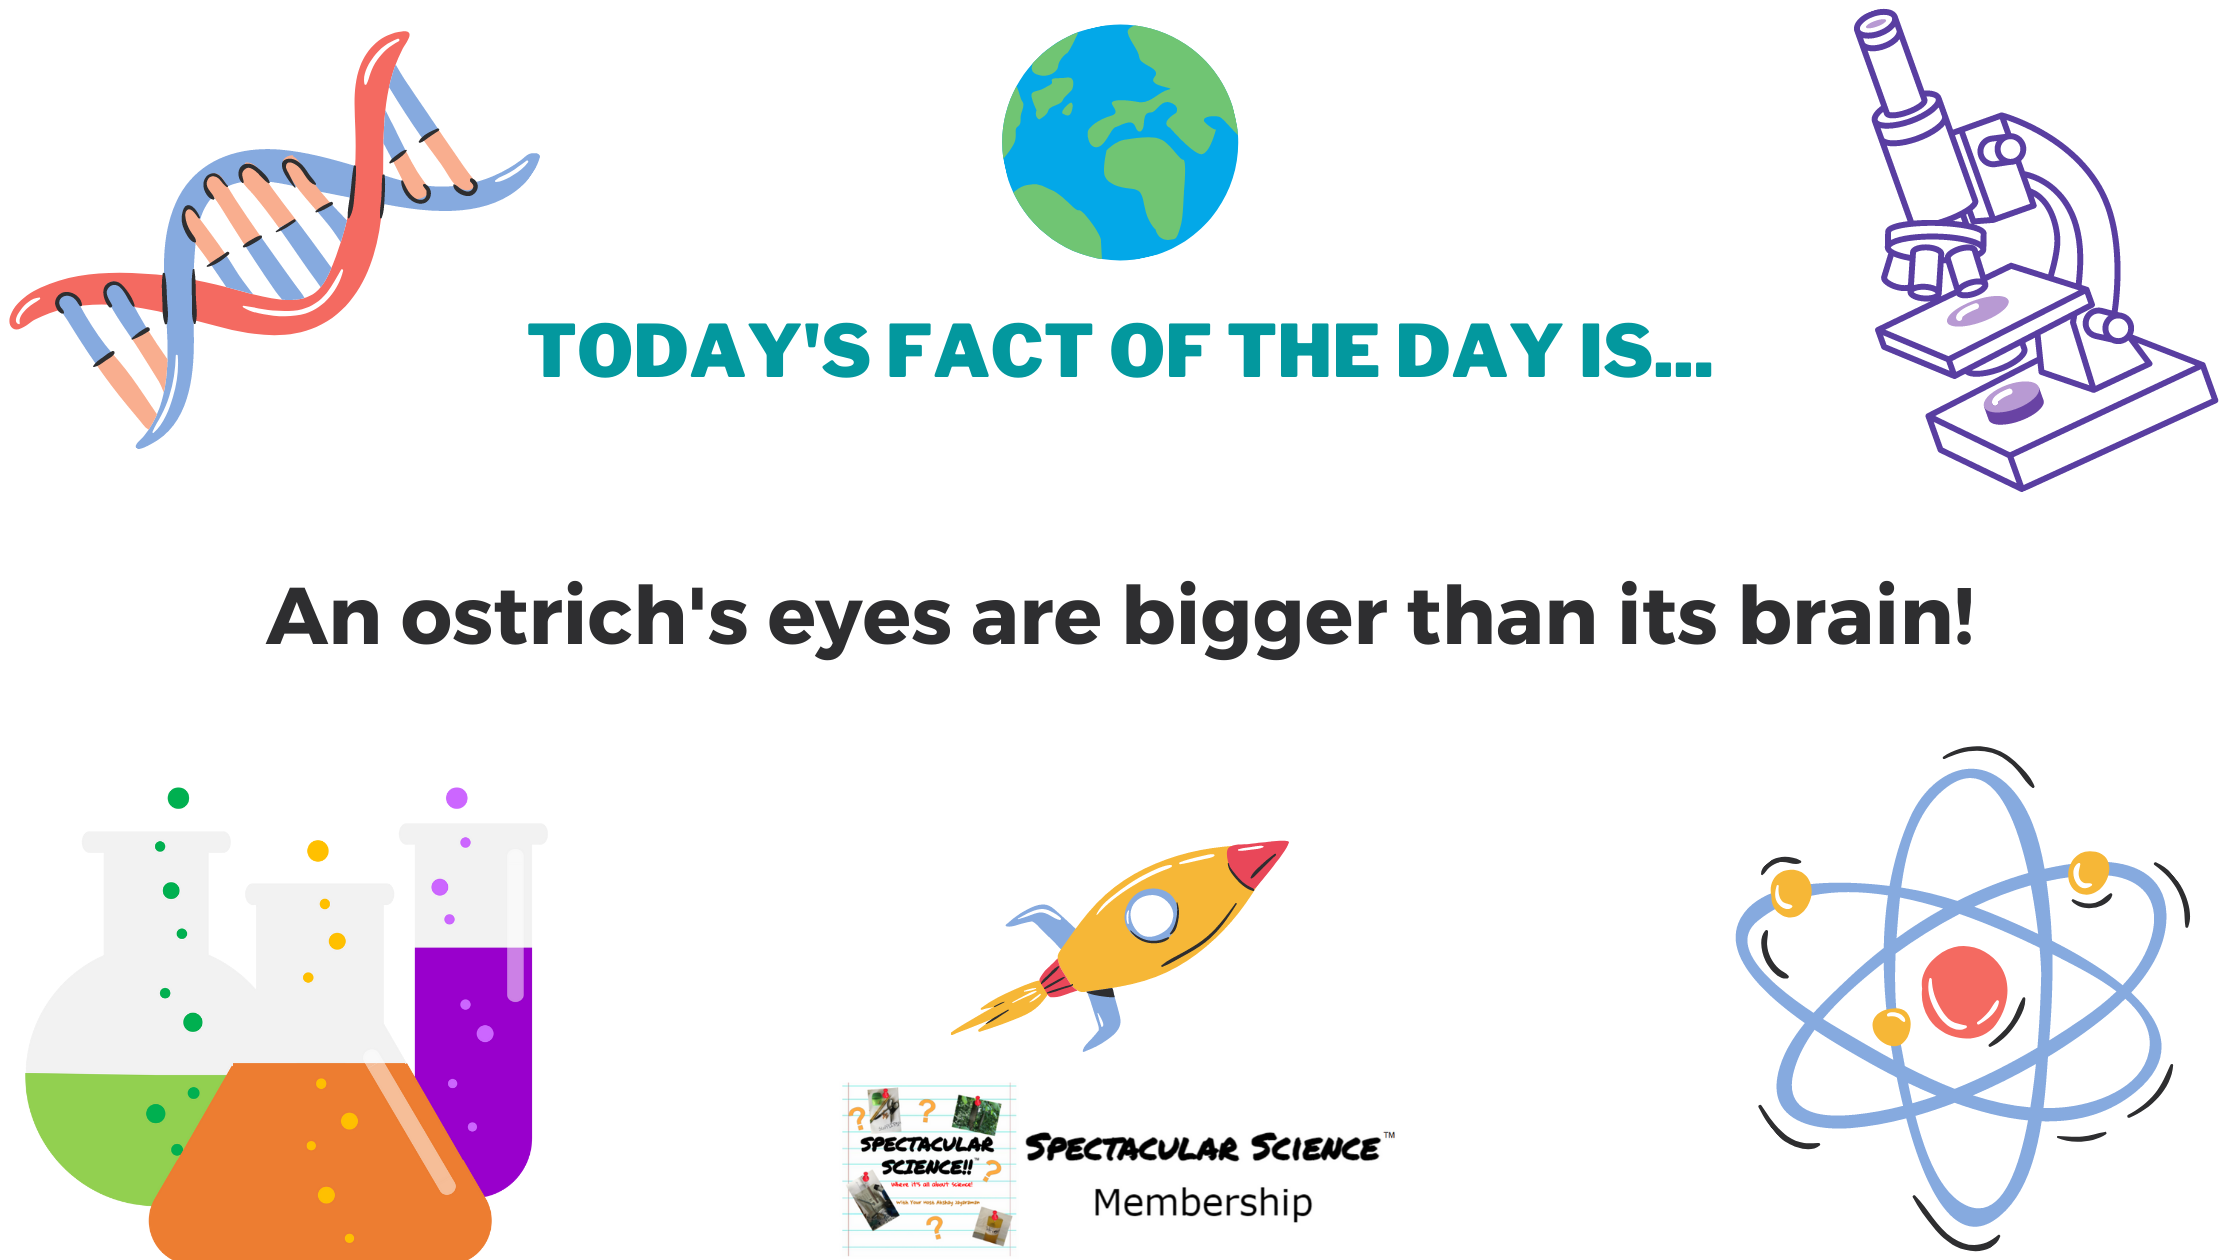 Fact of the Day Image May 25th